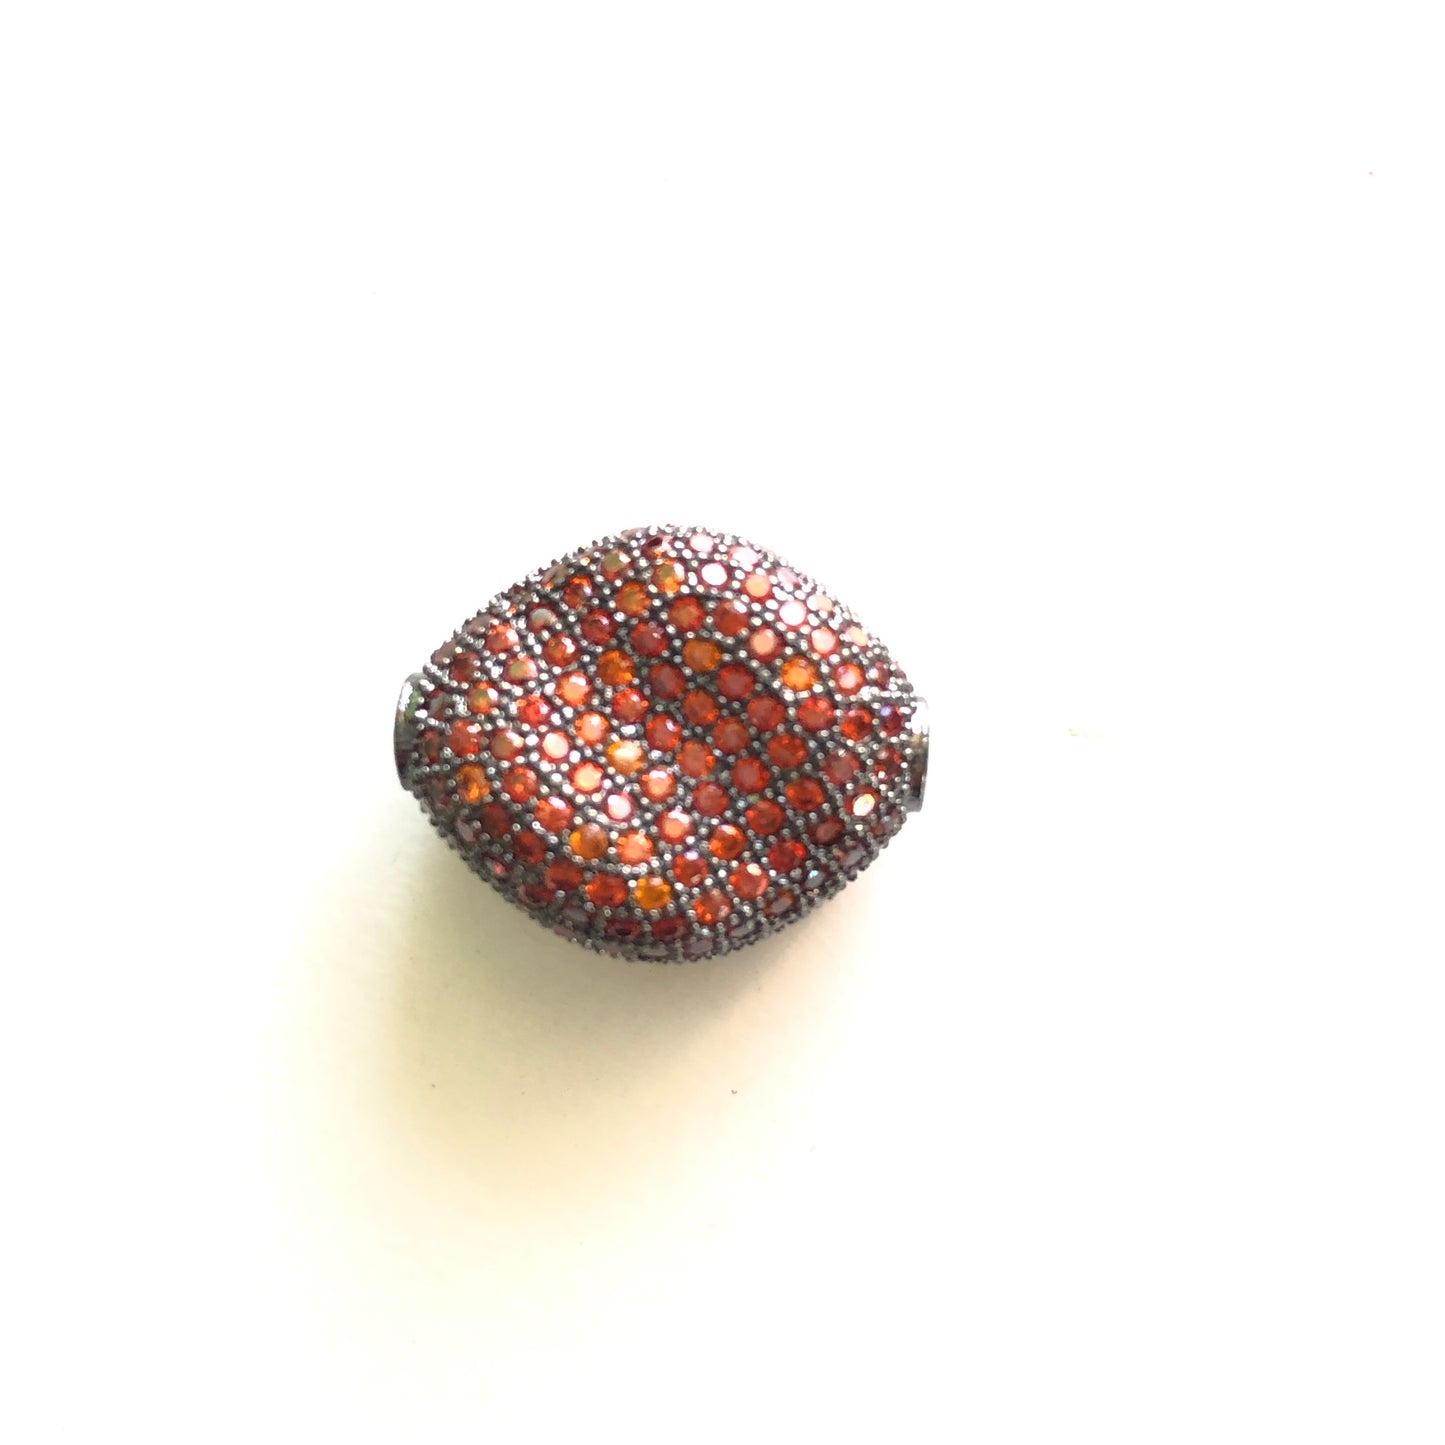 5-10pcs/lot 20*17mm Colorful CZ Paved Rhombus Centerpiece Spacers Reddish Orange CZ Paved Spacers Colorful Zirconia Rhombus Spacers Charms Beads Beyond